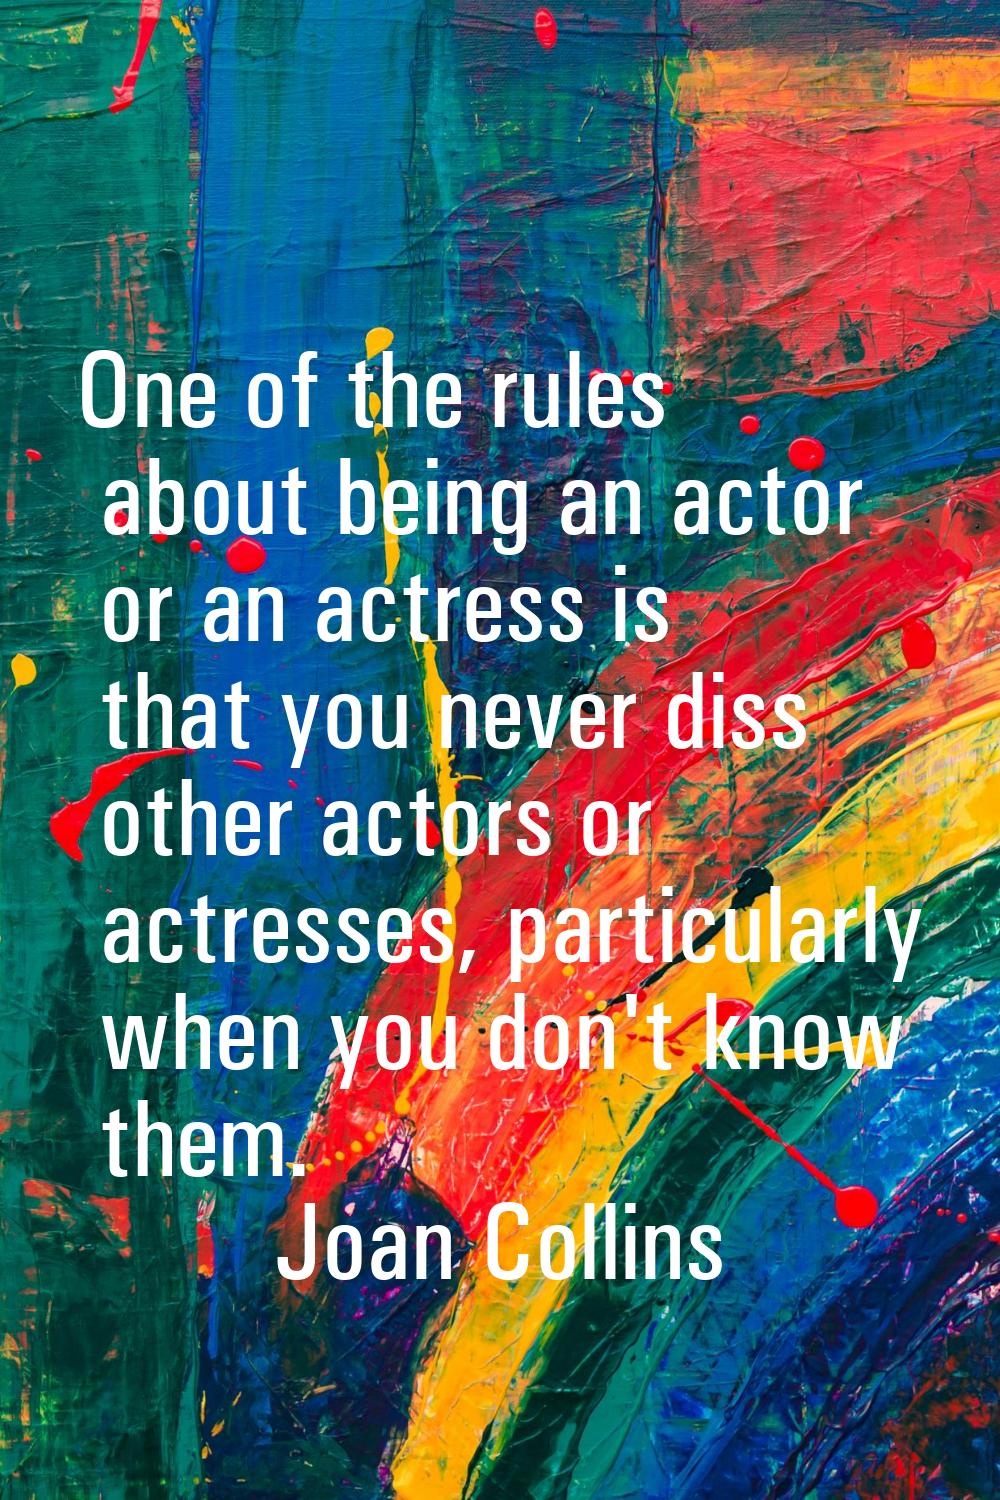 One of the rules about being an actor or an actress is that you never diss other actors or actresse